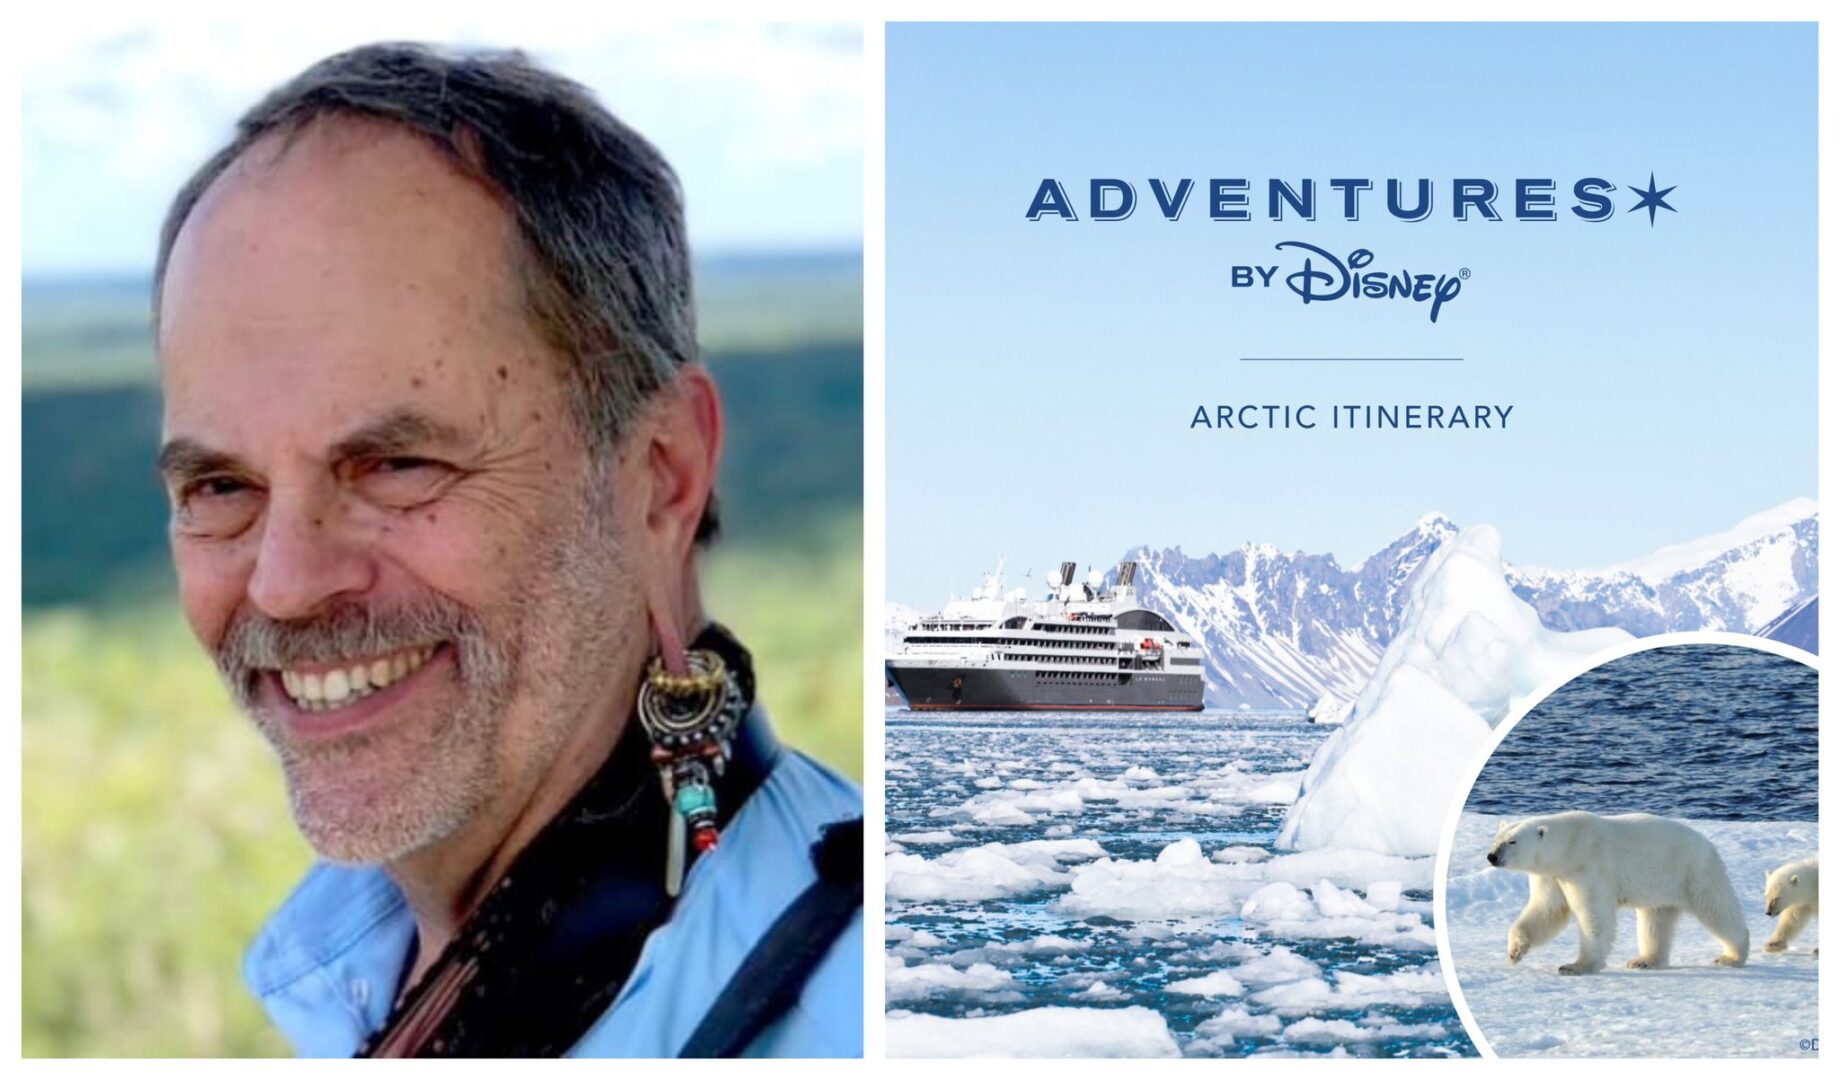 Travel to the Arctic with Joe Rohde and Adventures by Disney